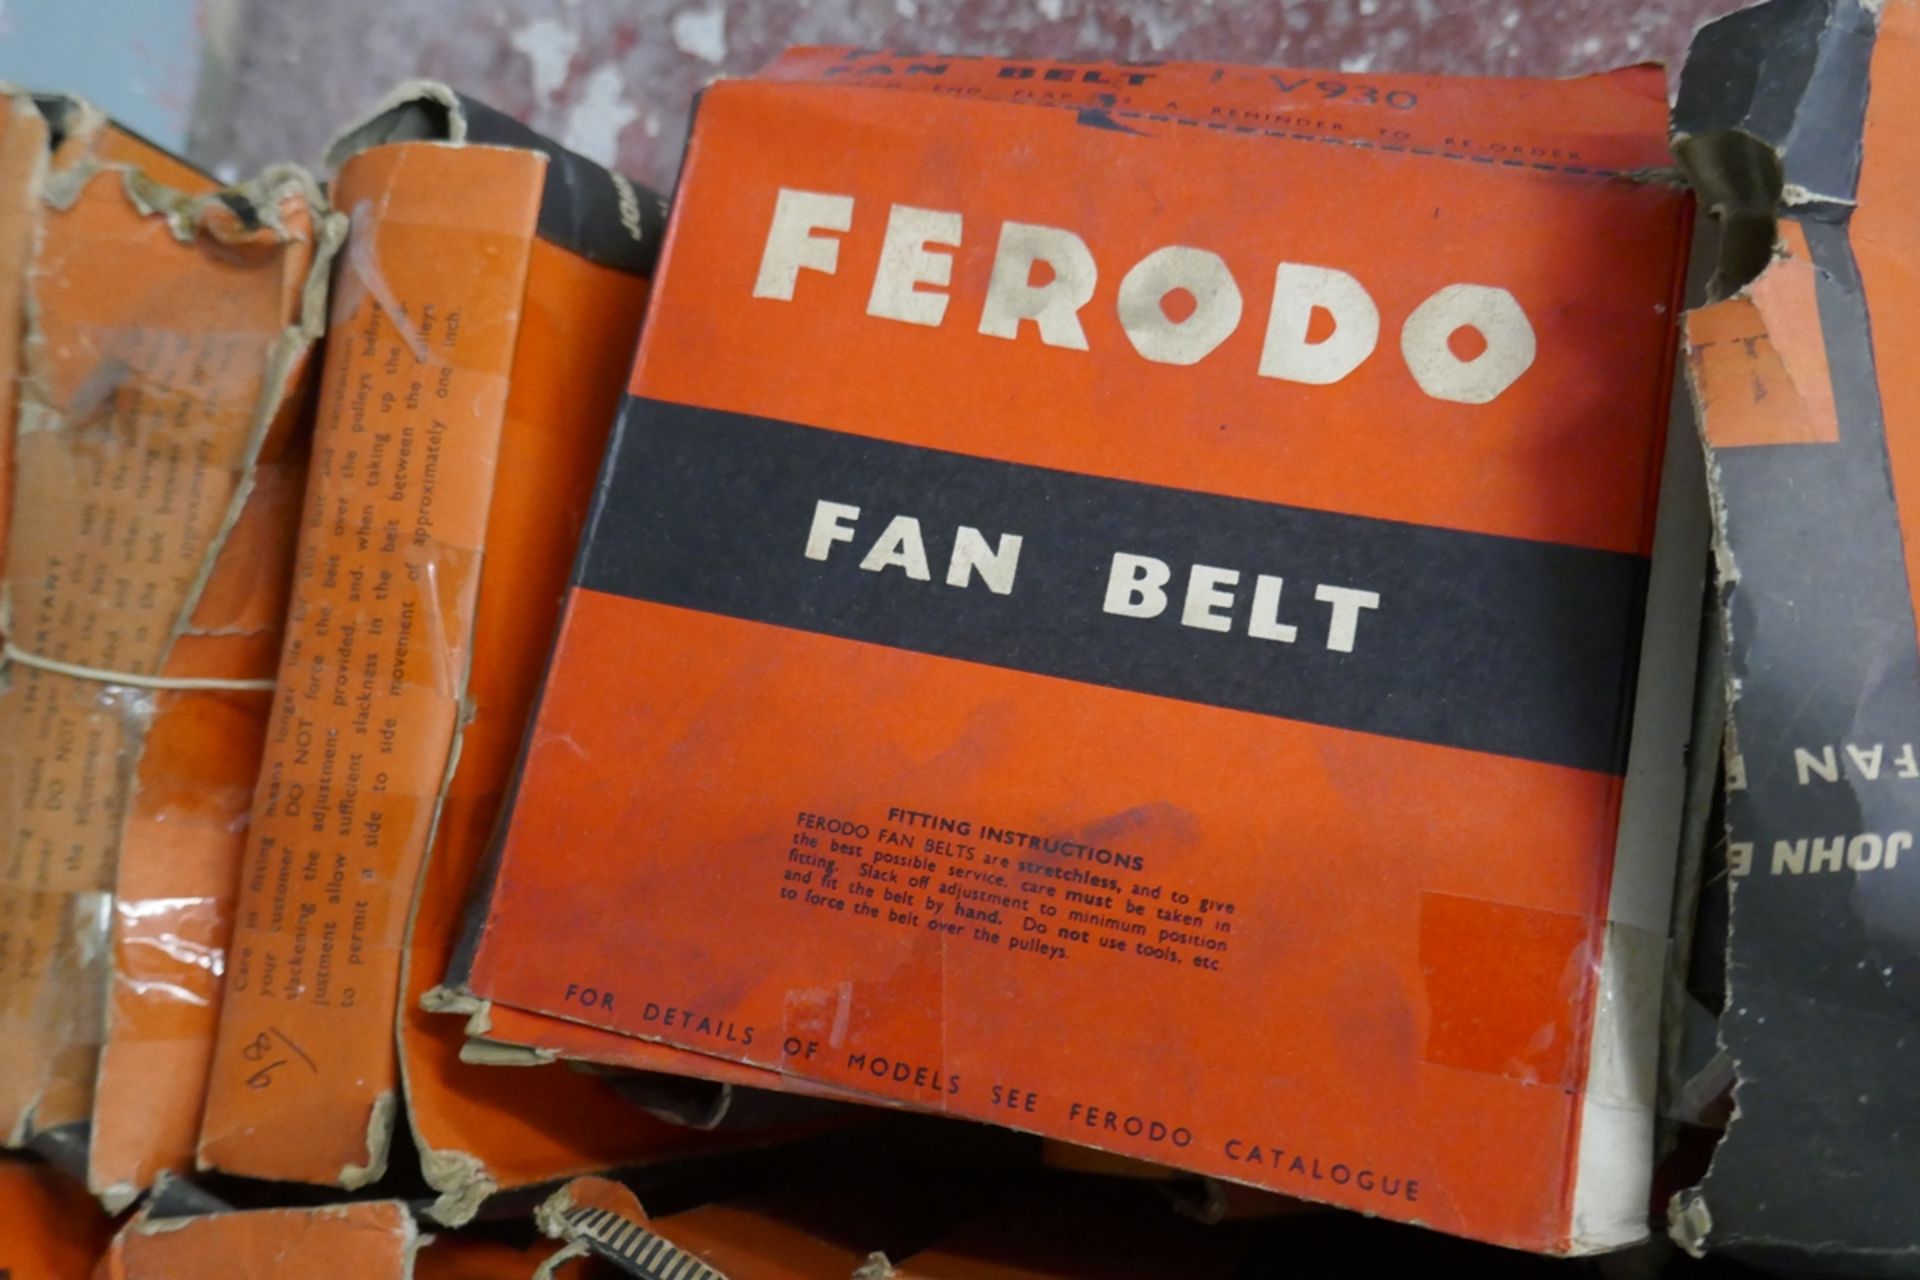 Large collection of new old stock Ferodo fan belts - Image 3 of 4